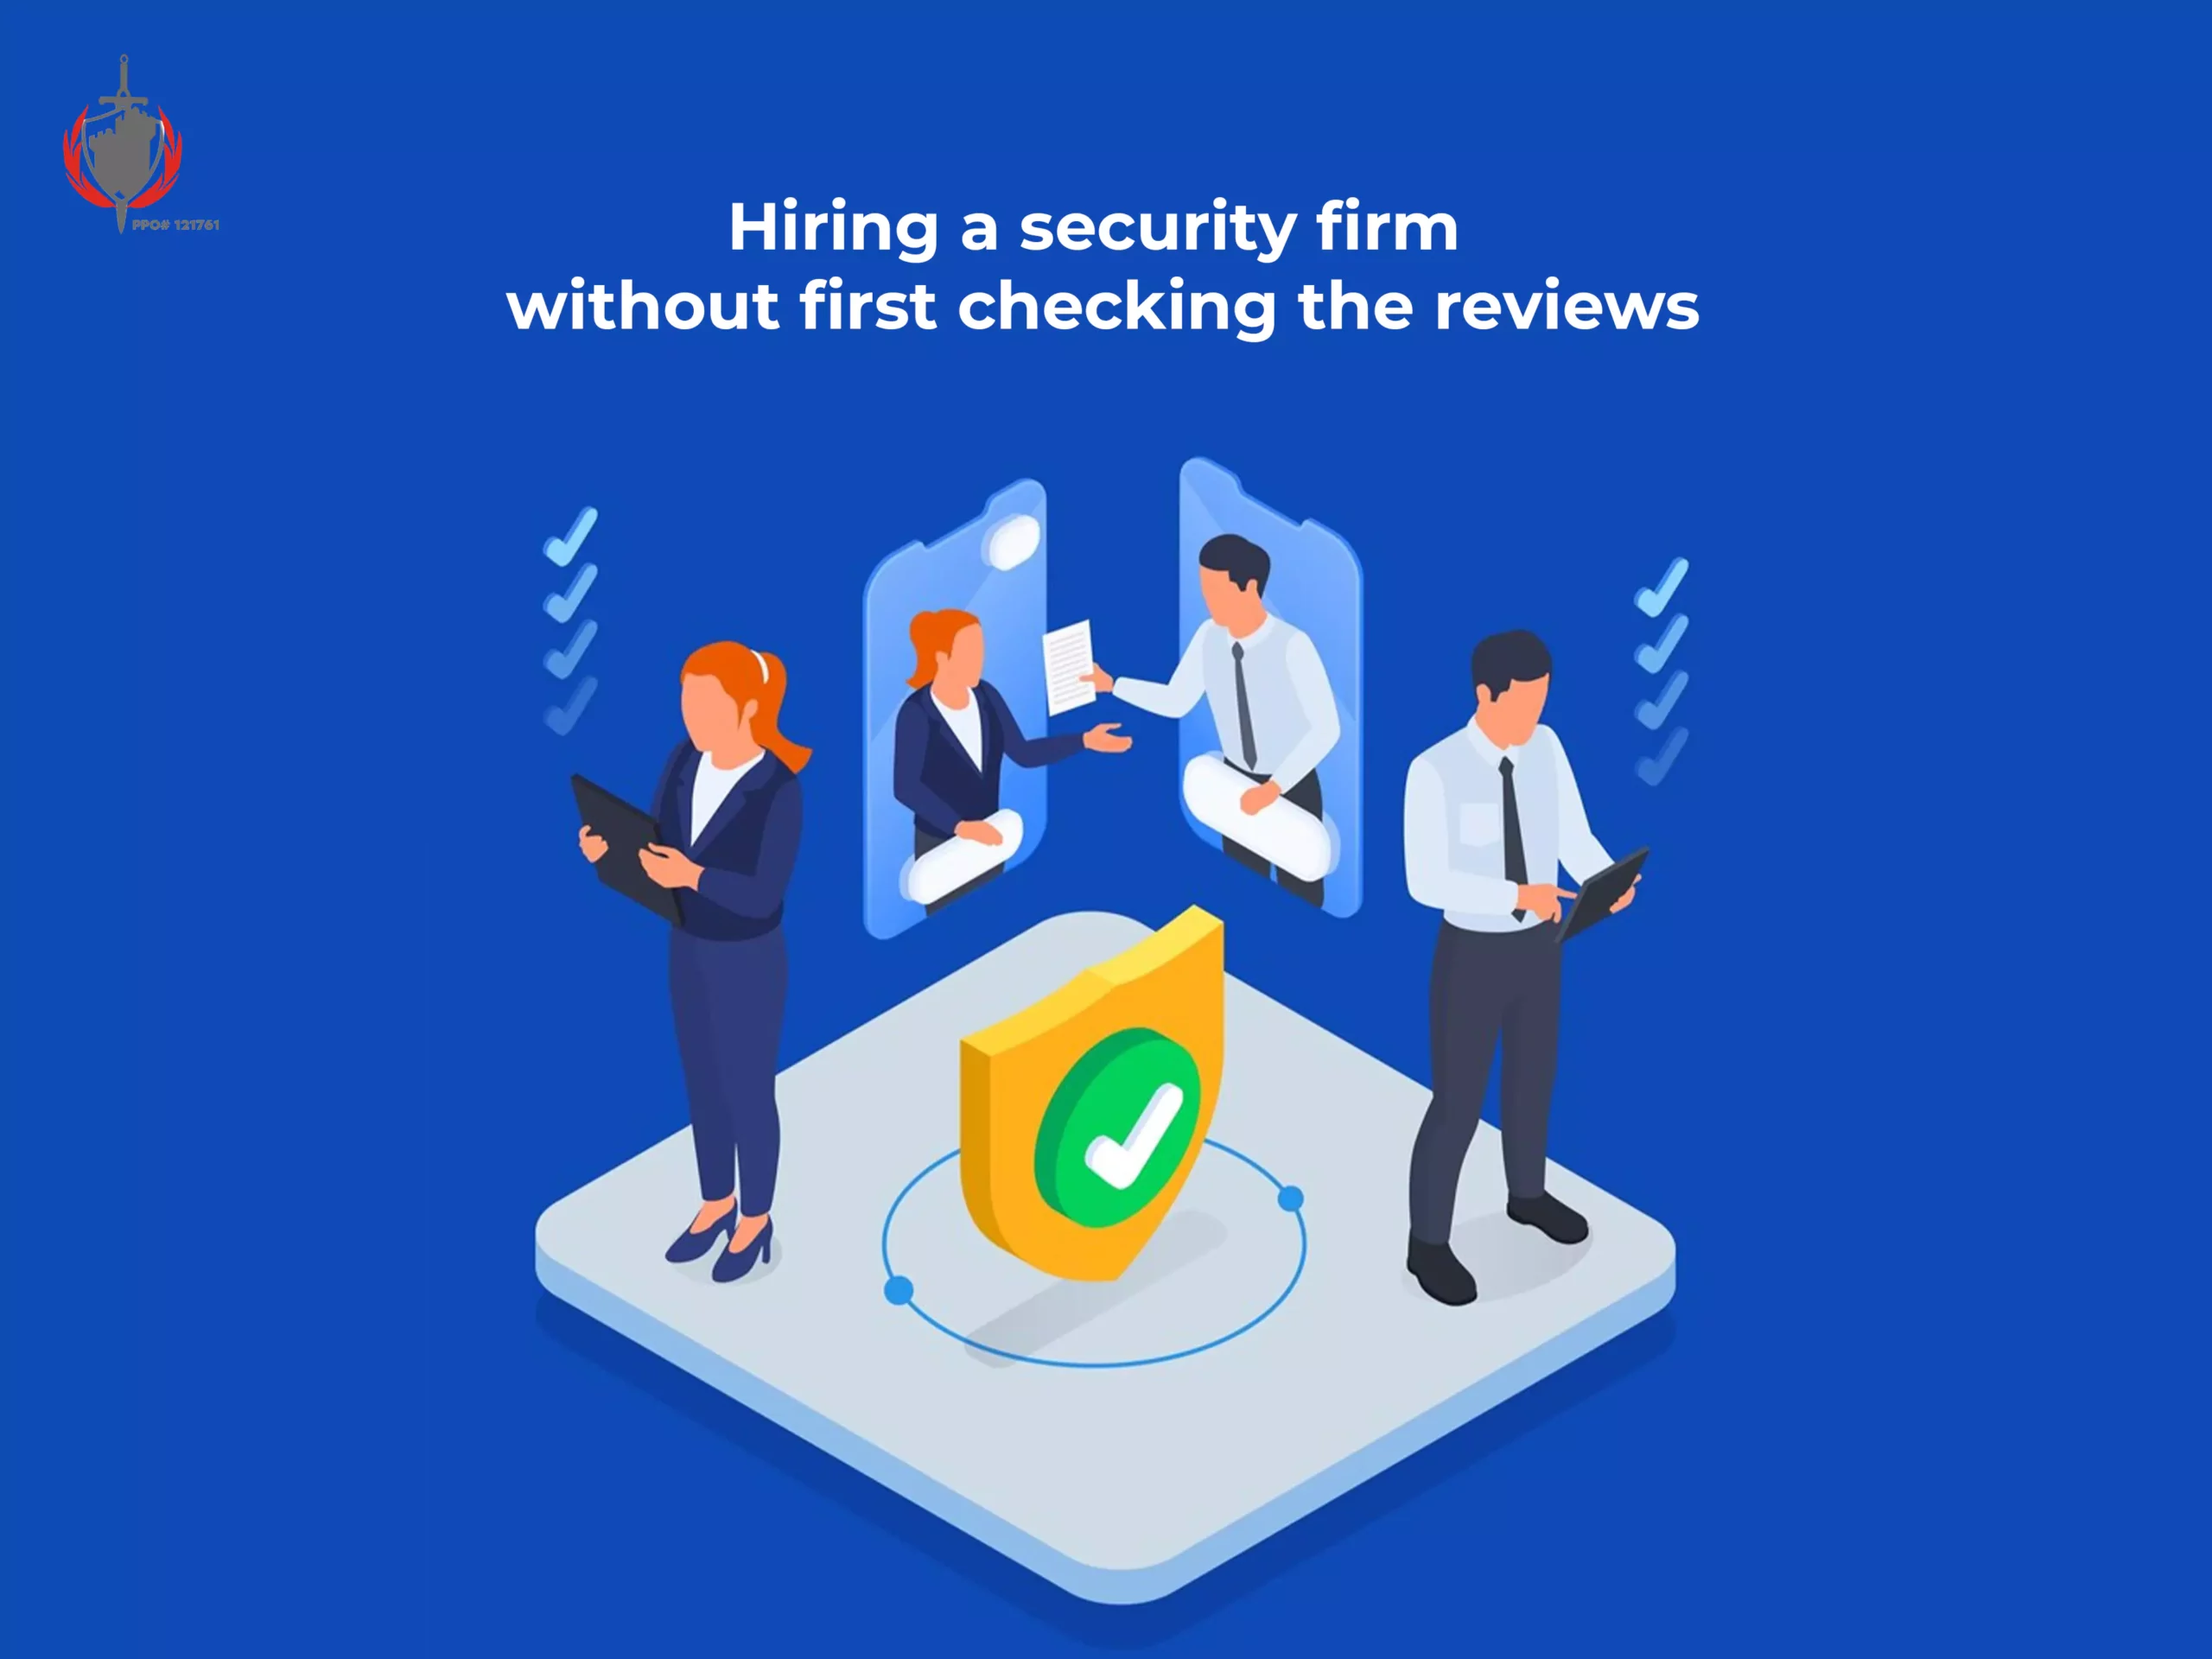 Hiring a security firm without first checking the reviews